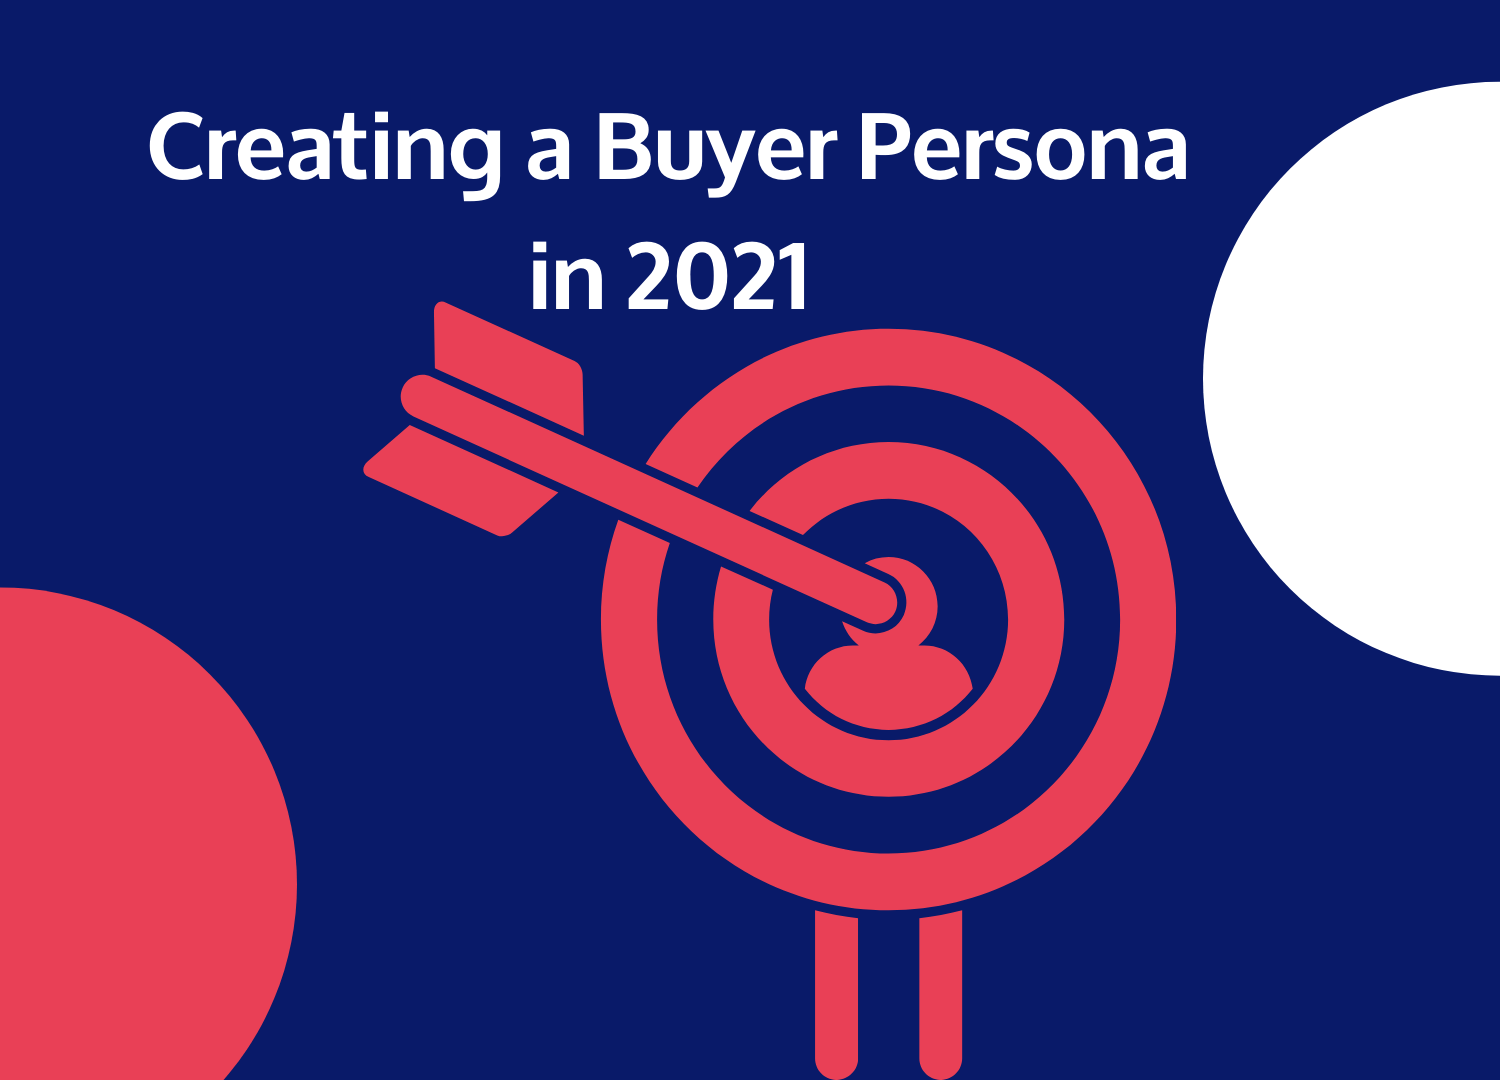 Creating a Buyer Persona in 2021